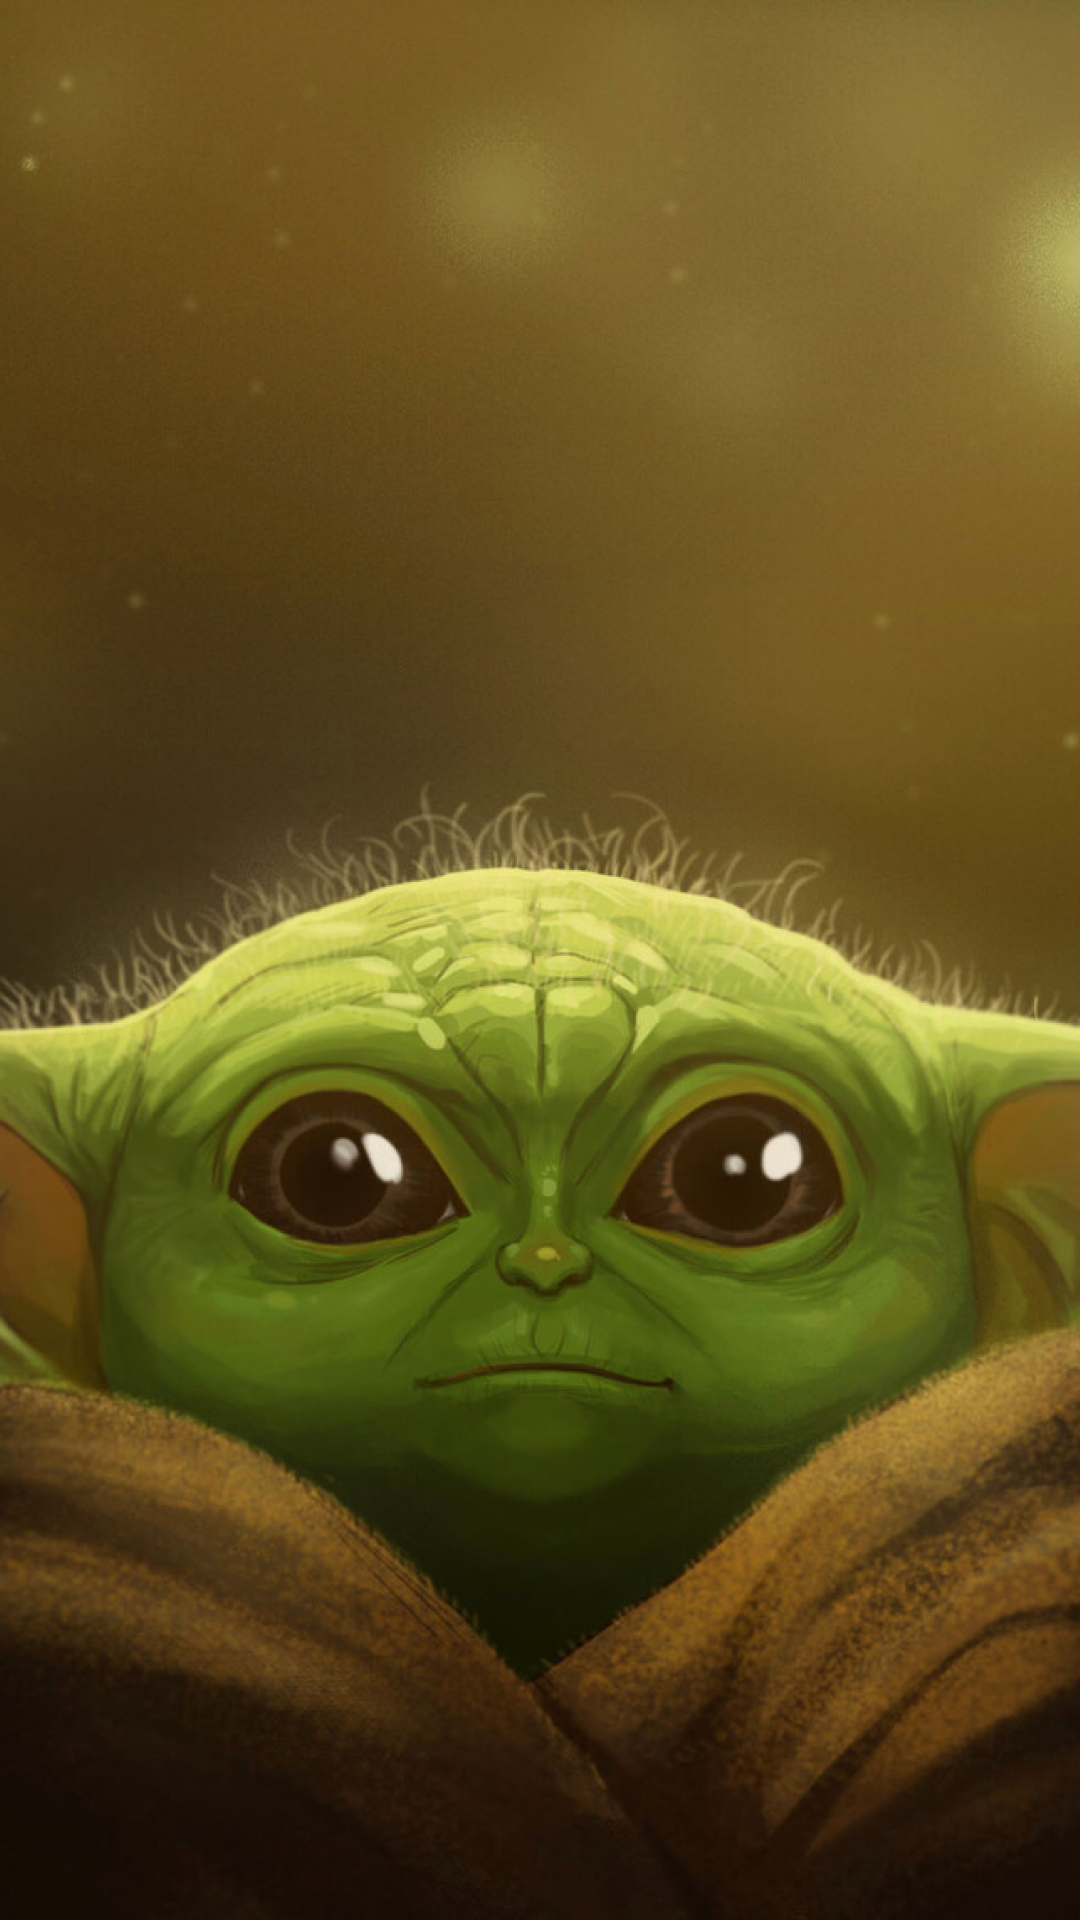 1080x1920 Baby Yoda FanArt 2019 Iphone 7, 6s, 6 Plus and ...